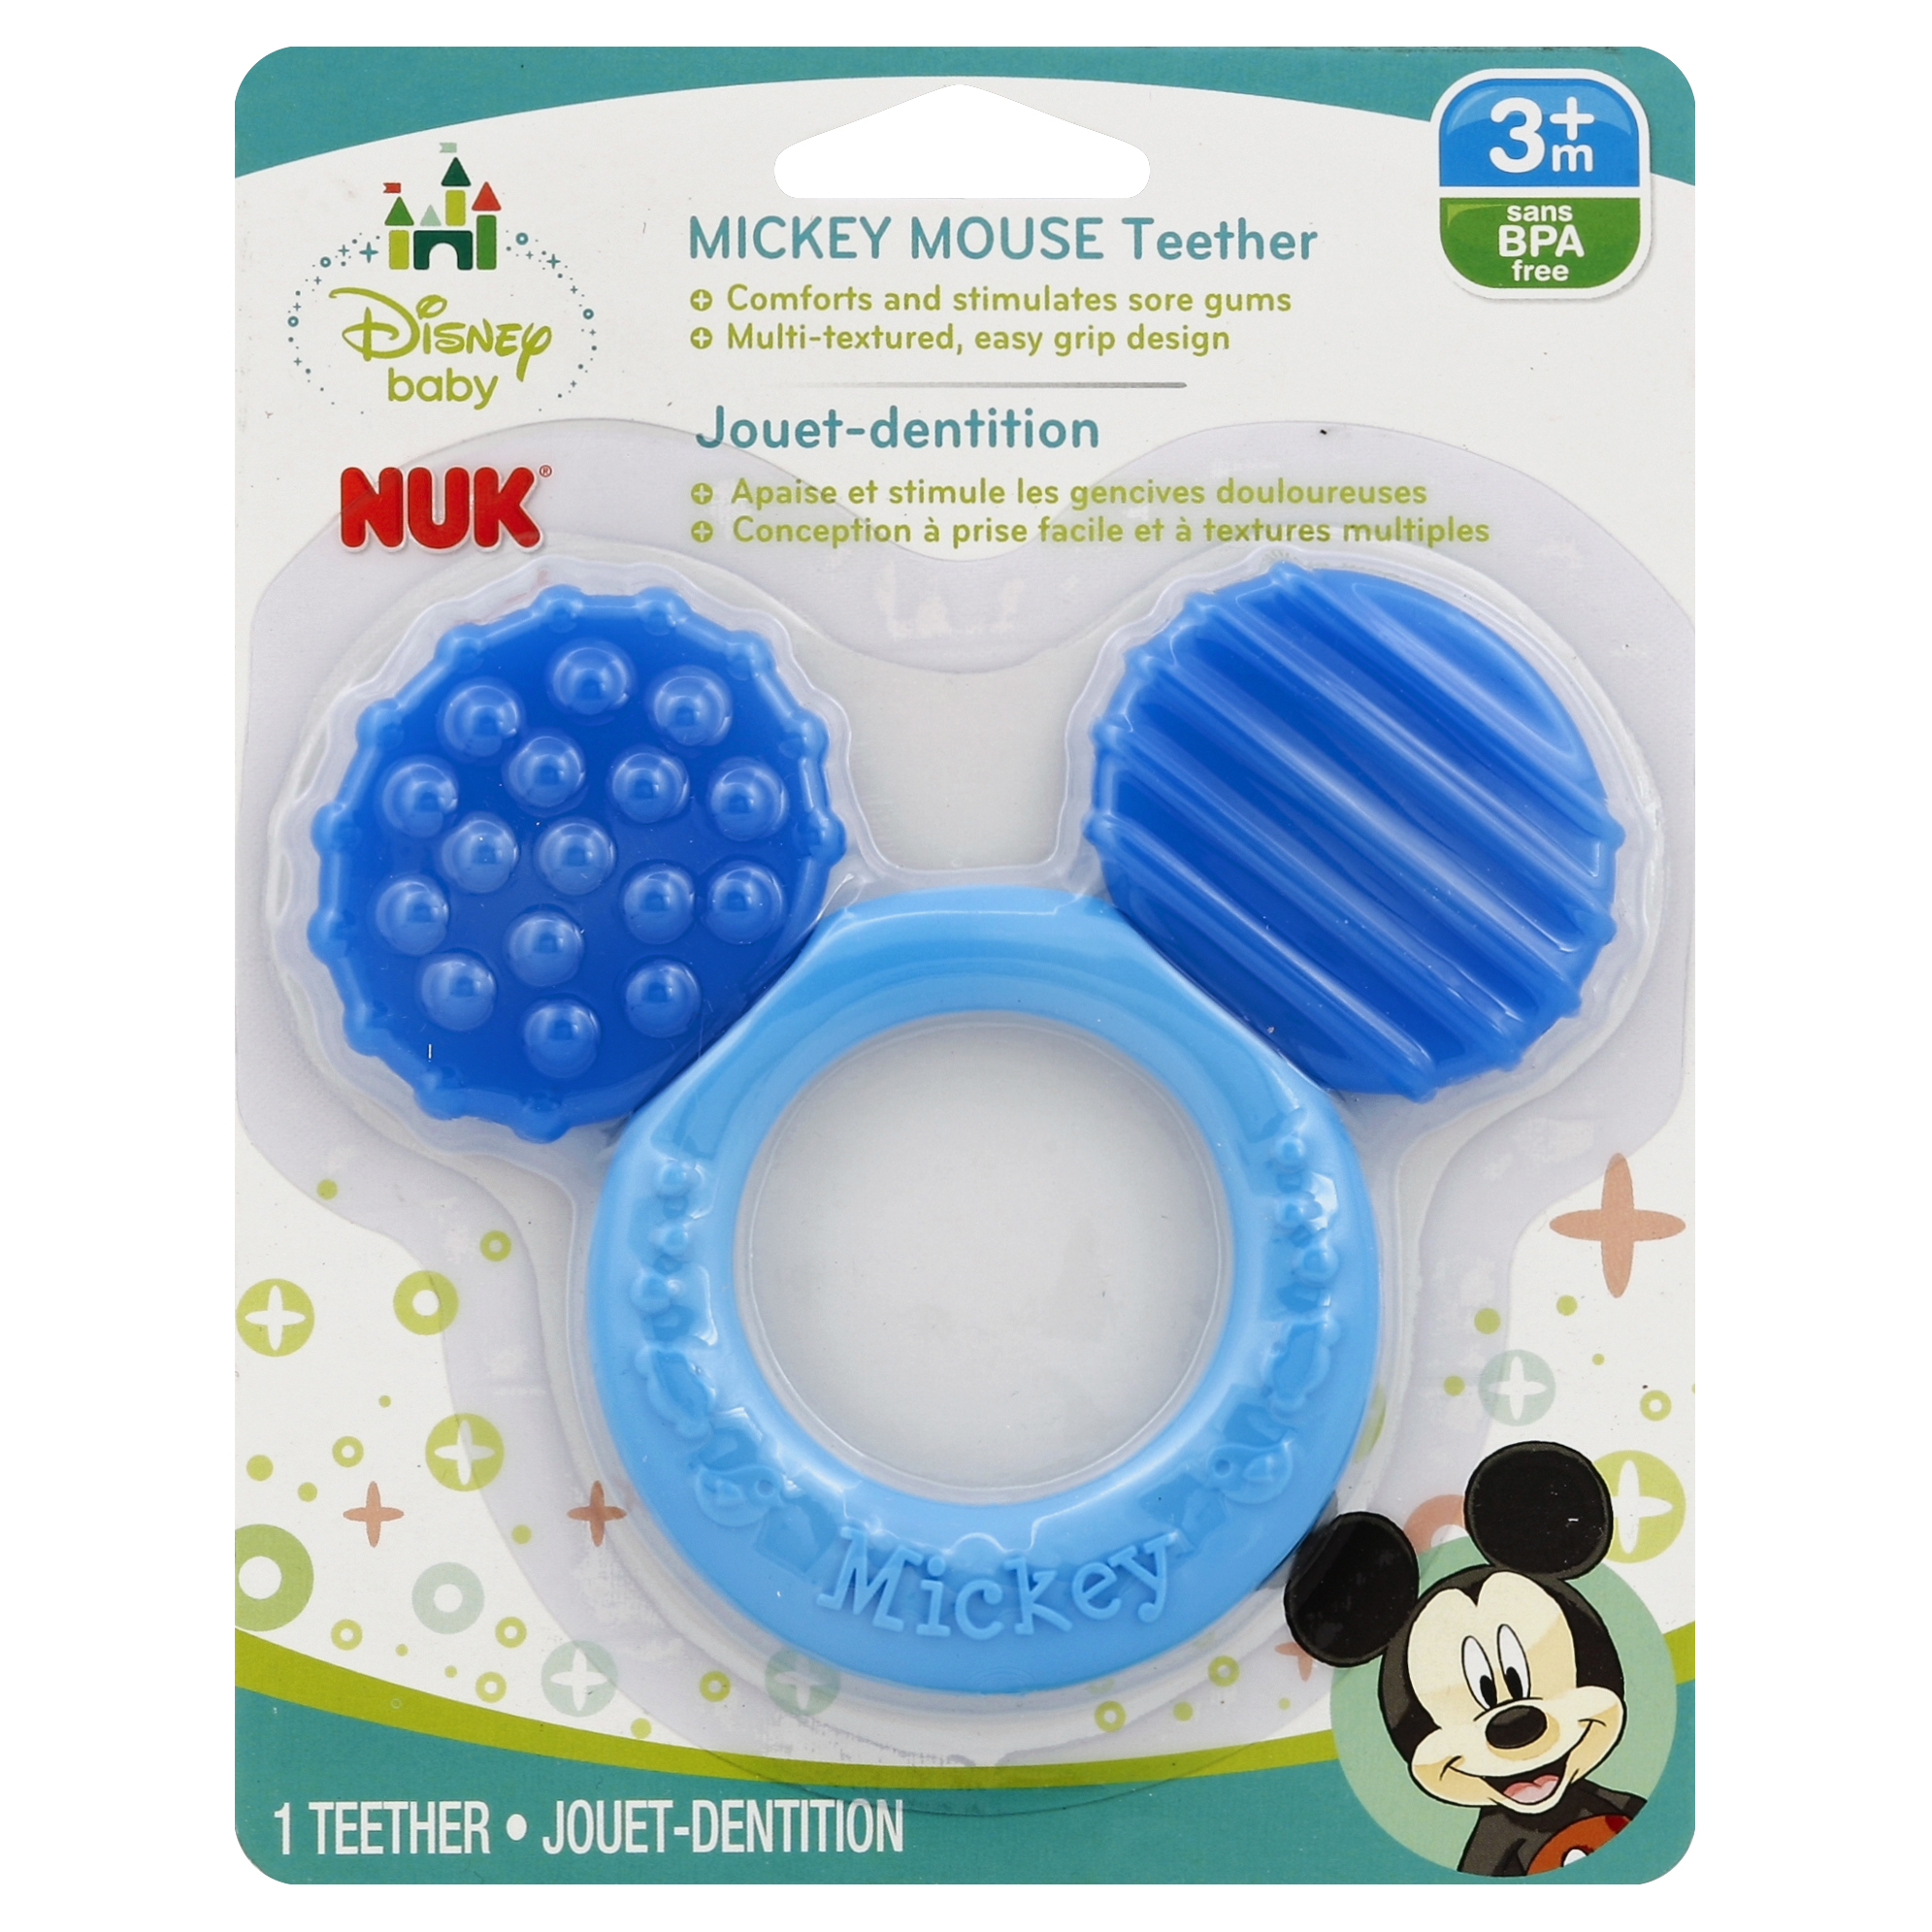 Nuk Mickey Mouse Teether - image 2 of 2